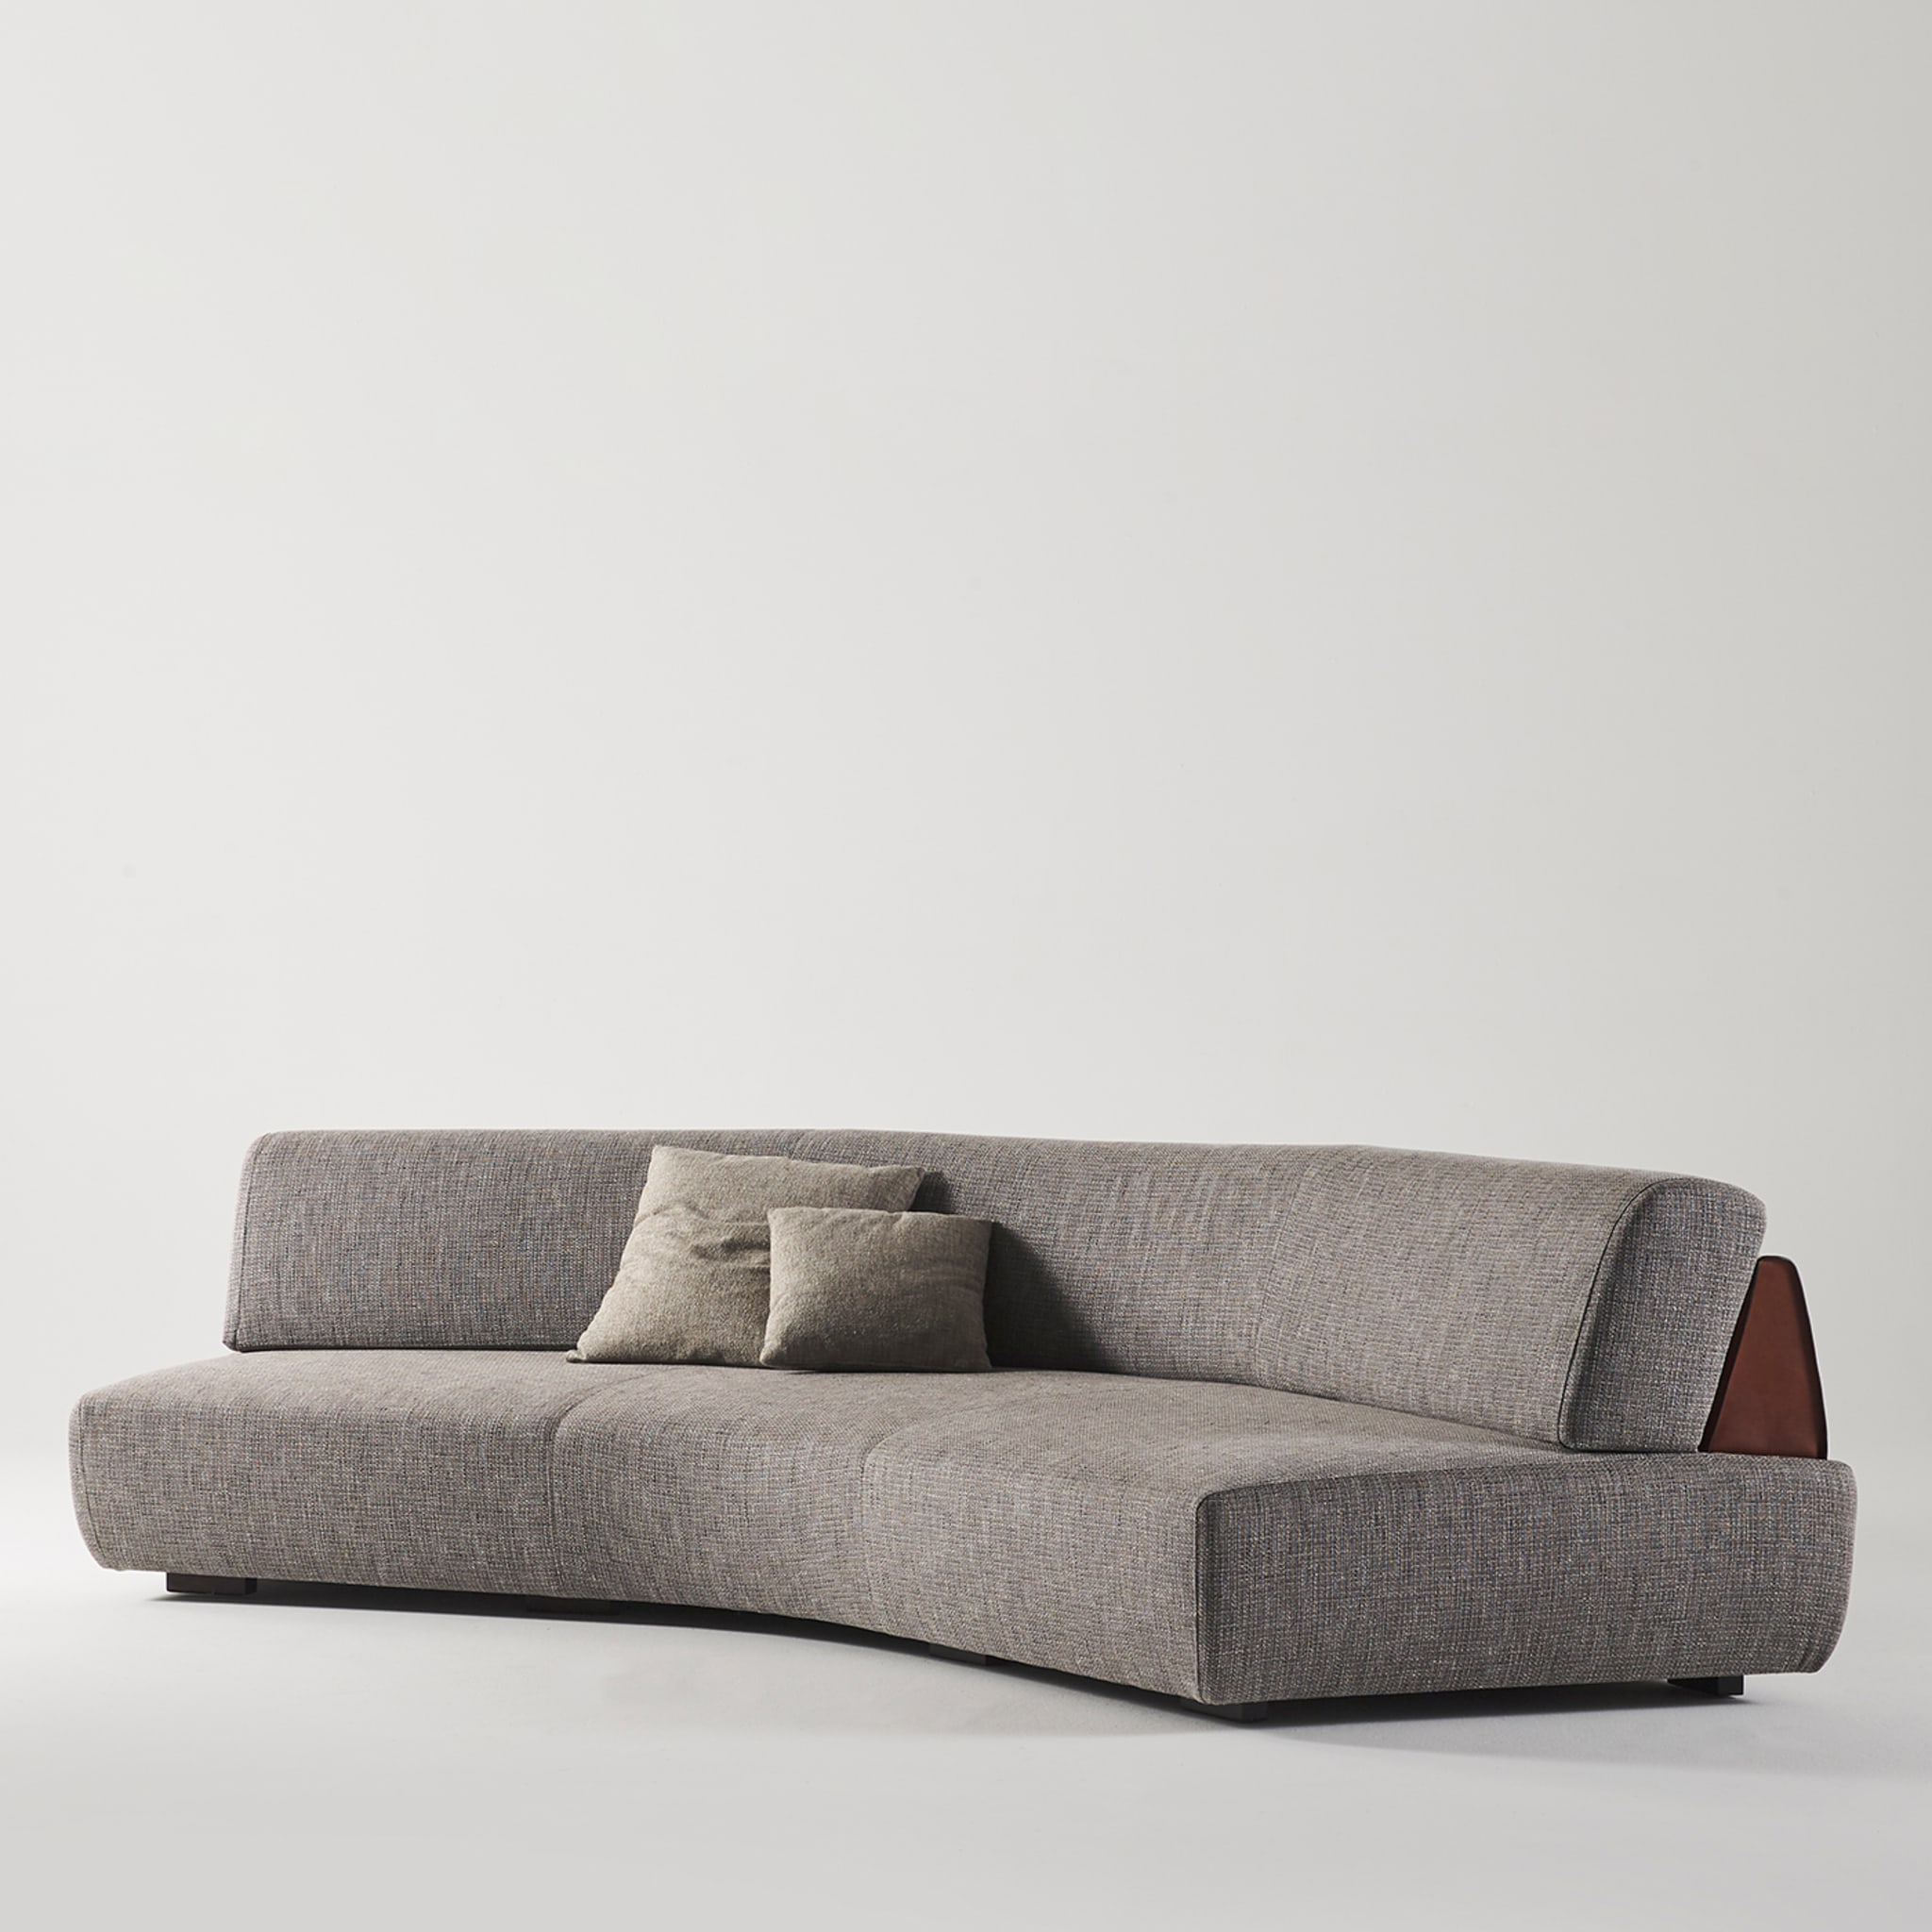 Mistral Curved Gray & Red Sofa - Alternative view 3